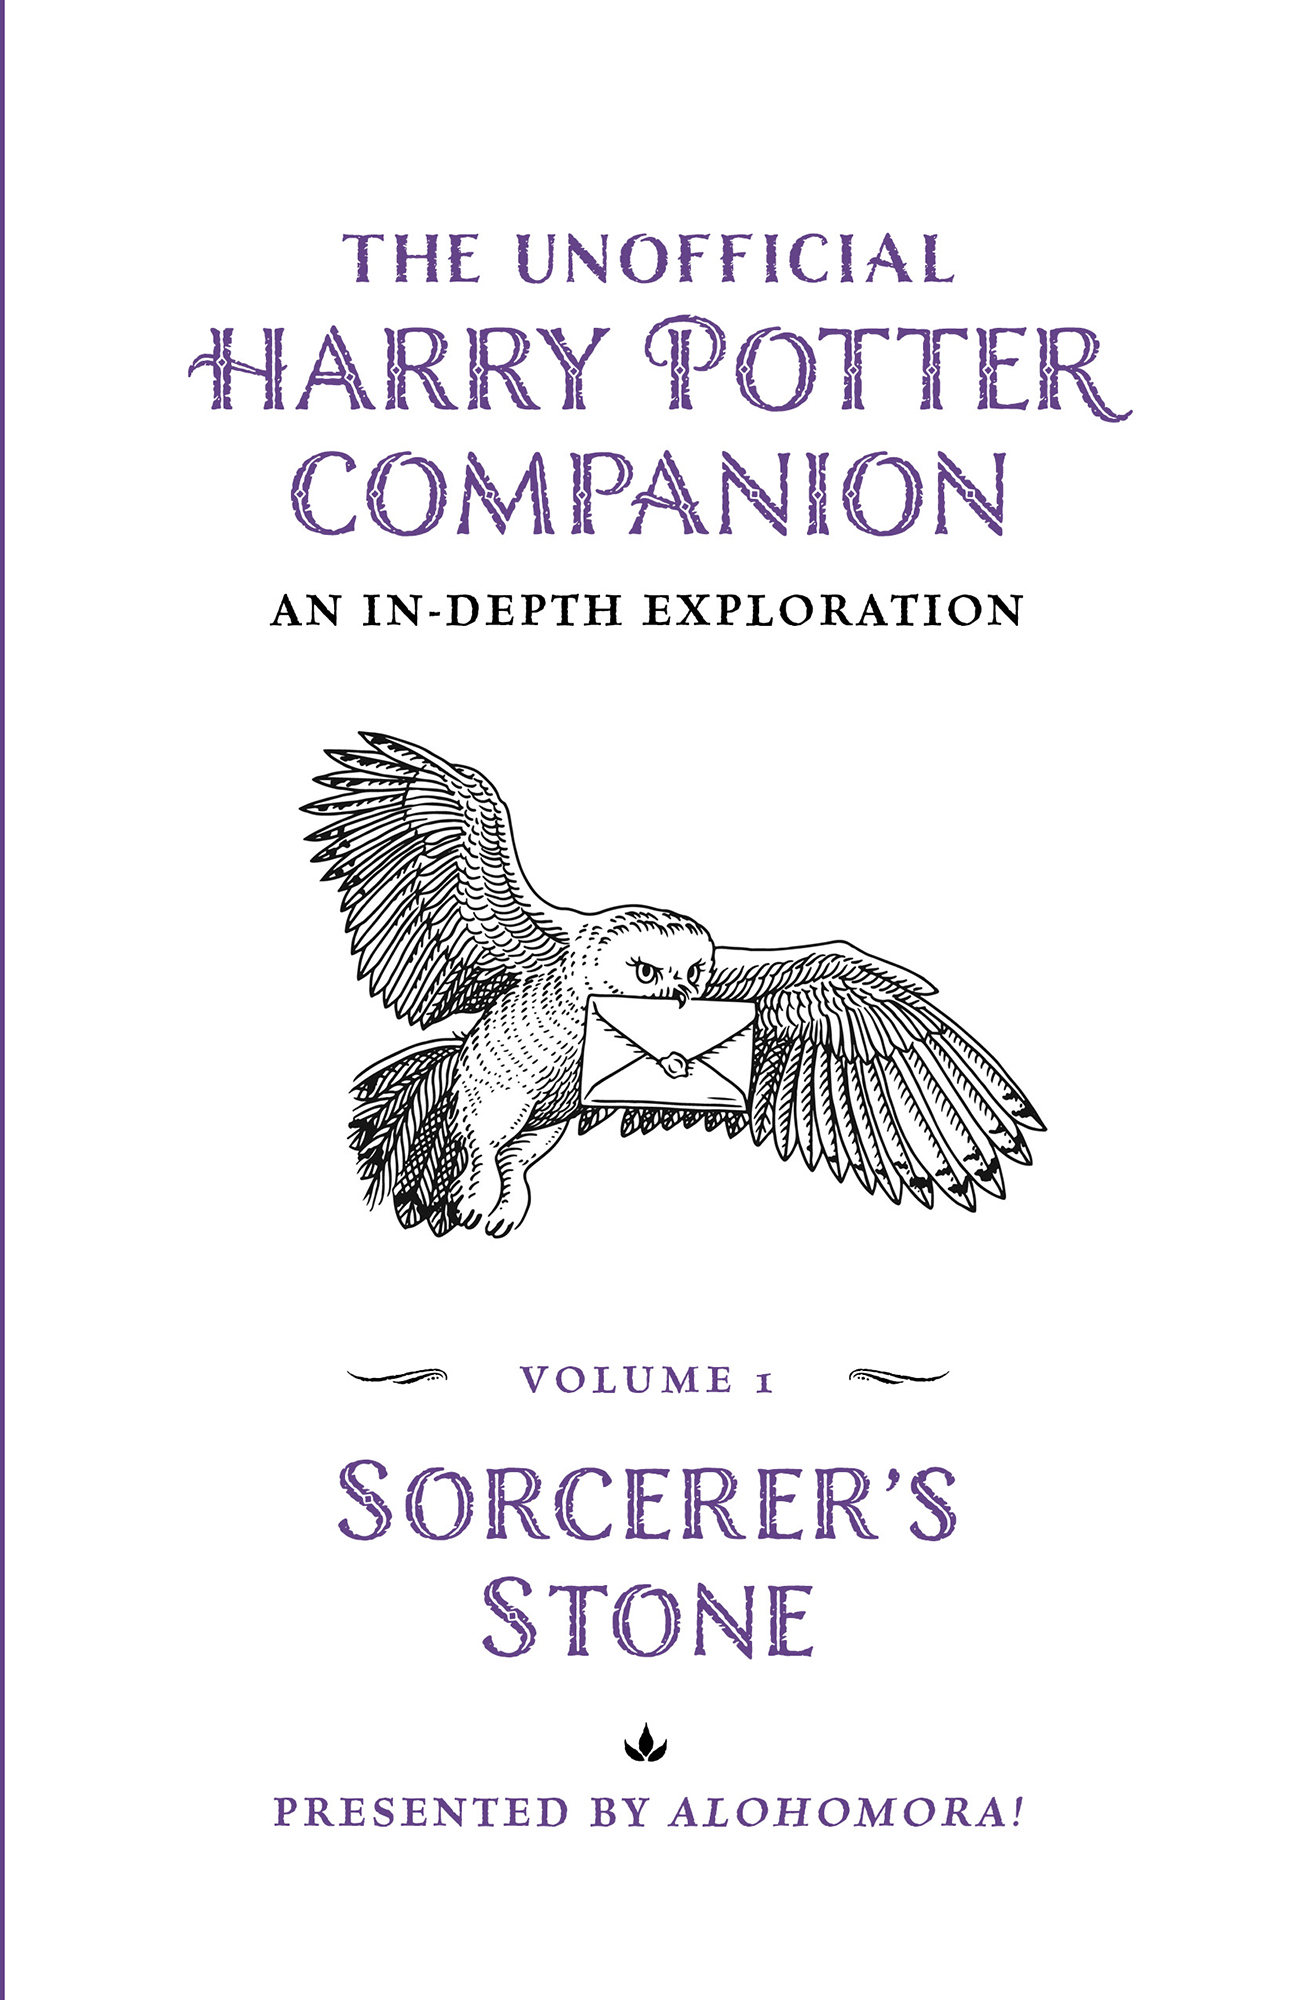 “The Unofficial Harry Potter Companion Volume 1: Sorcerer’s Stone” title page